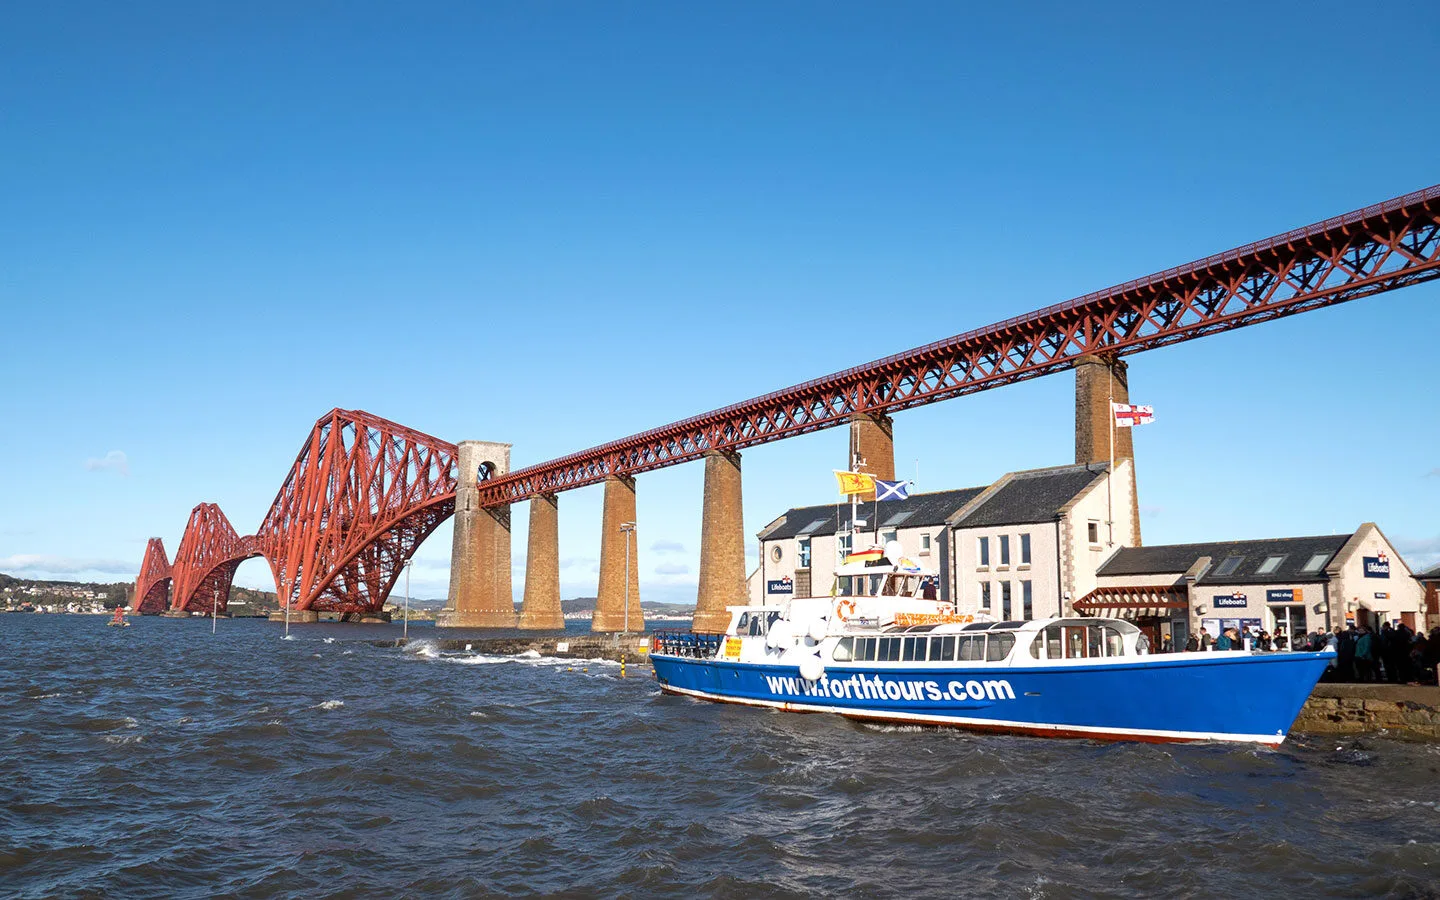 The Forth Bridge and a Forth Tours boat trip